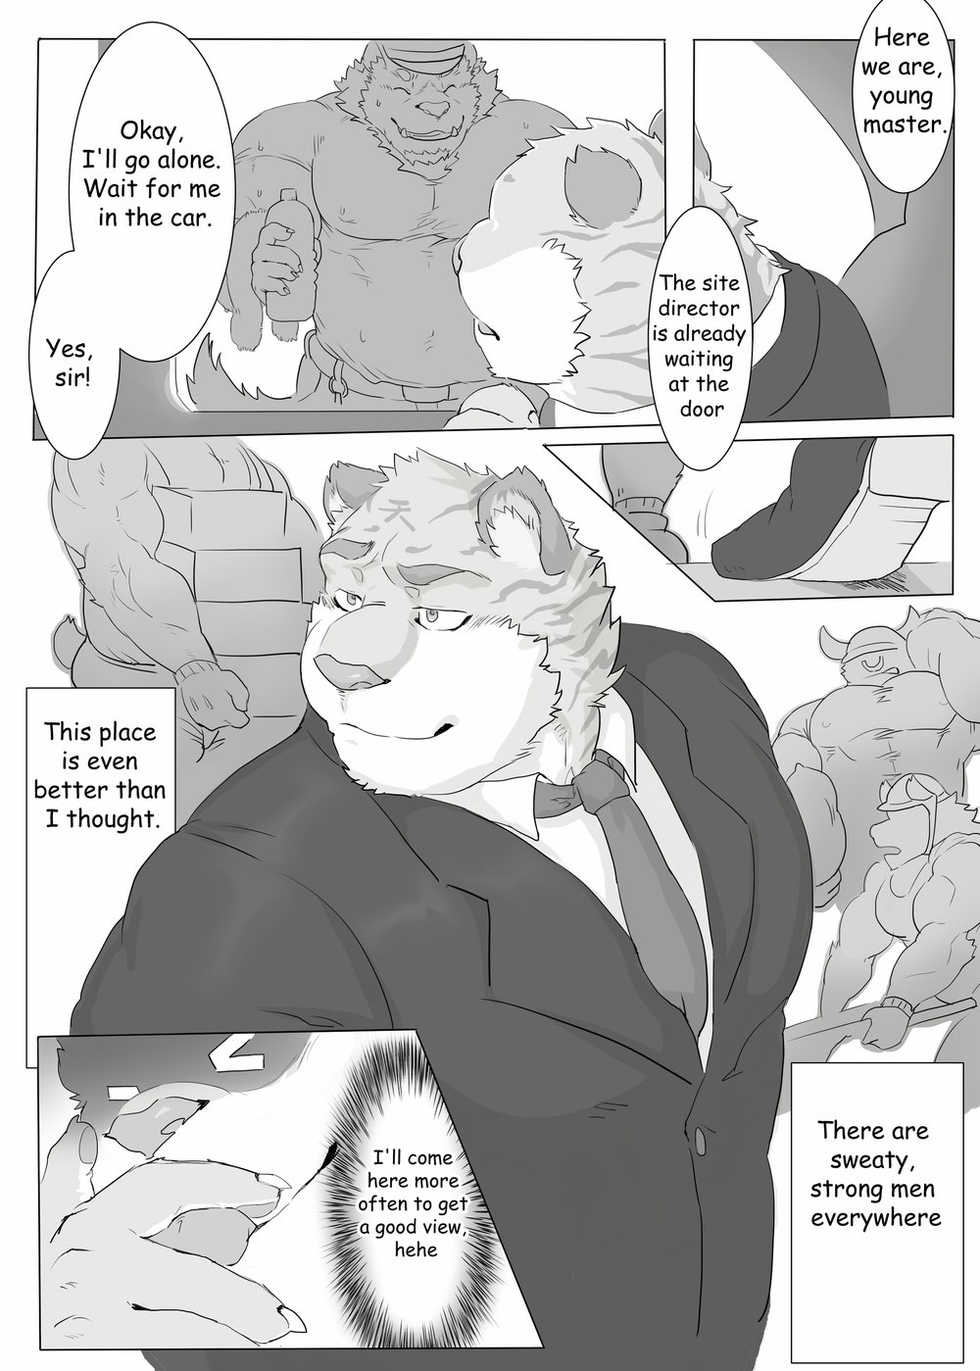 [Renoky] Encounter on Construction site [English] [Digital] - Page 4